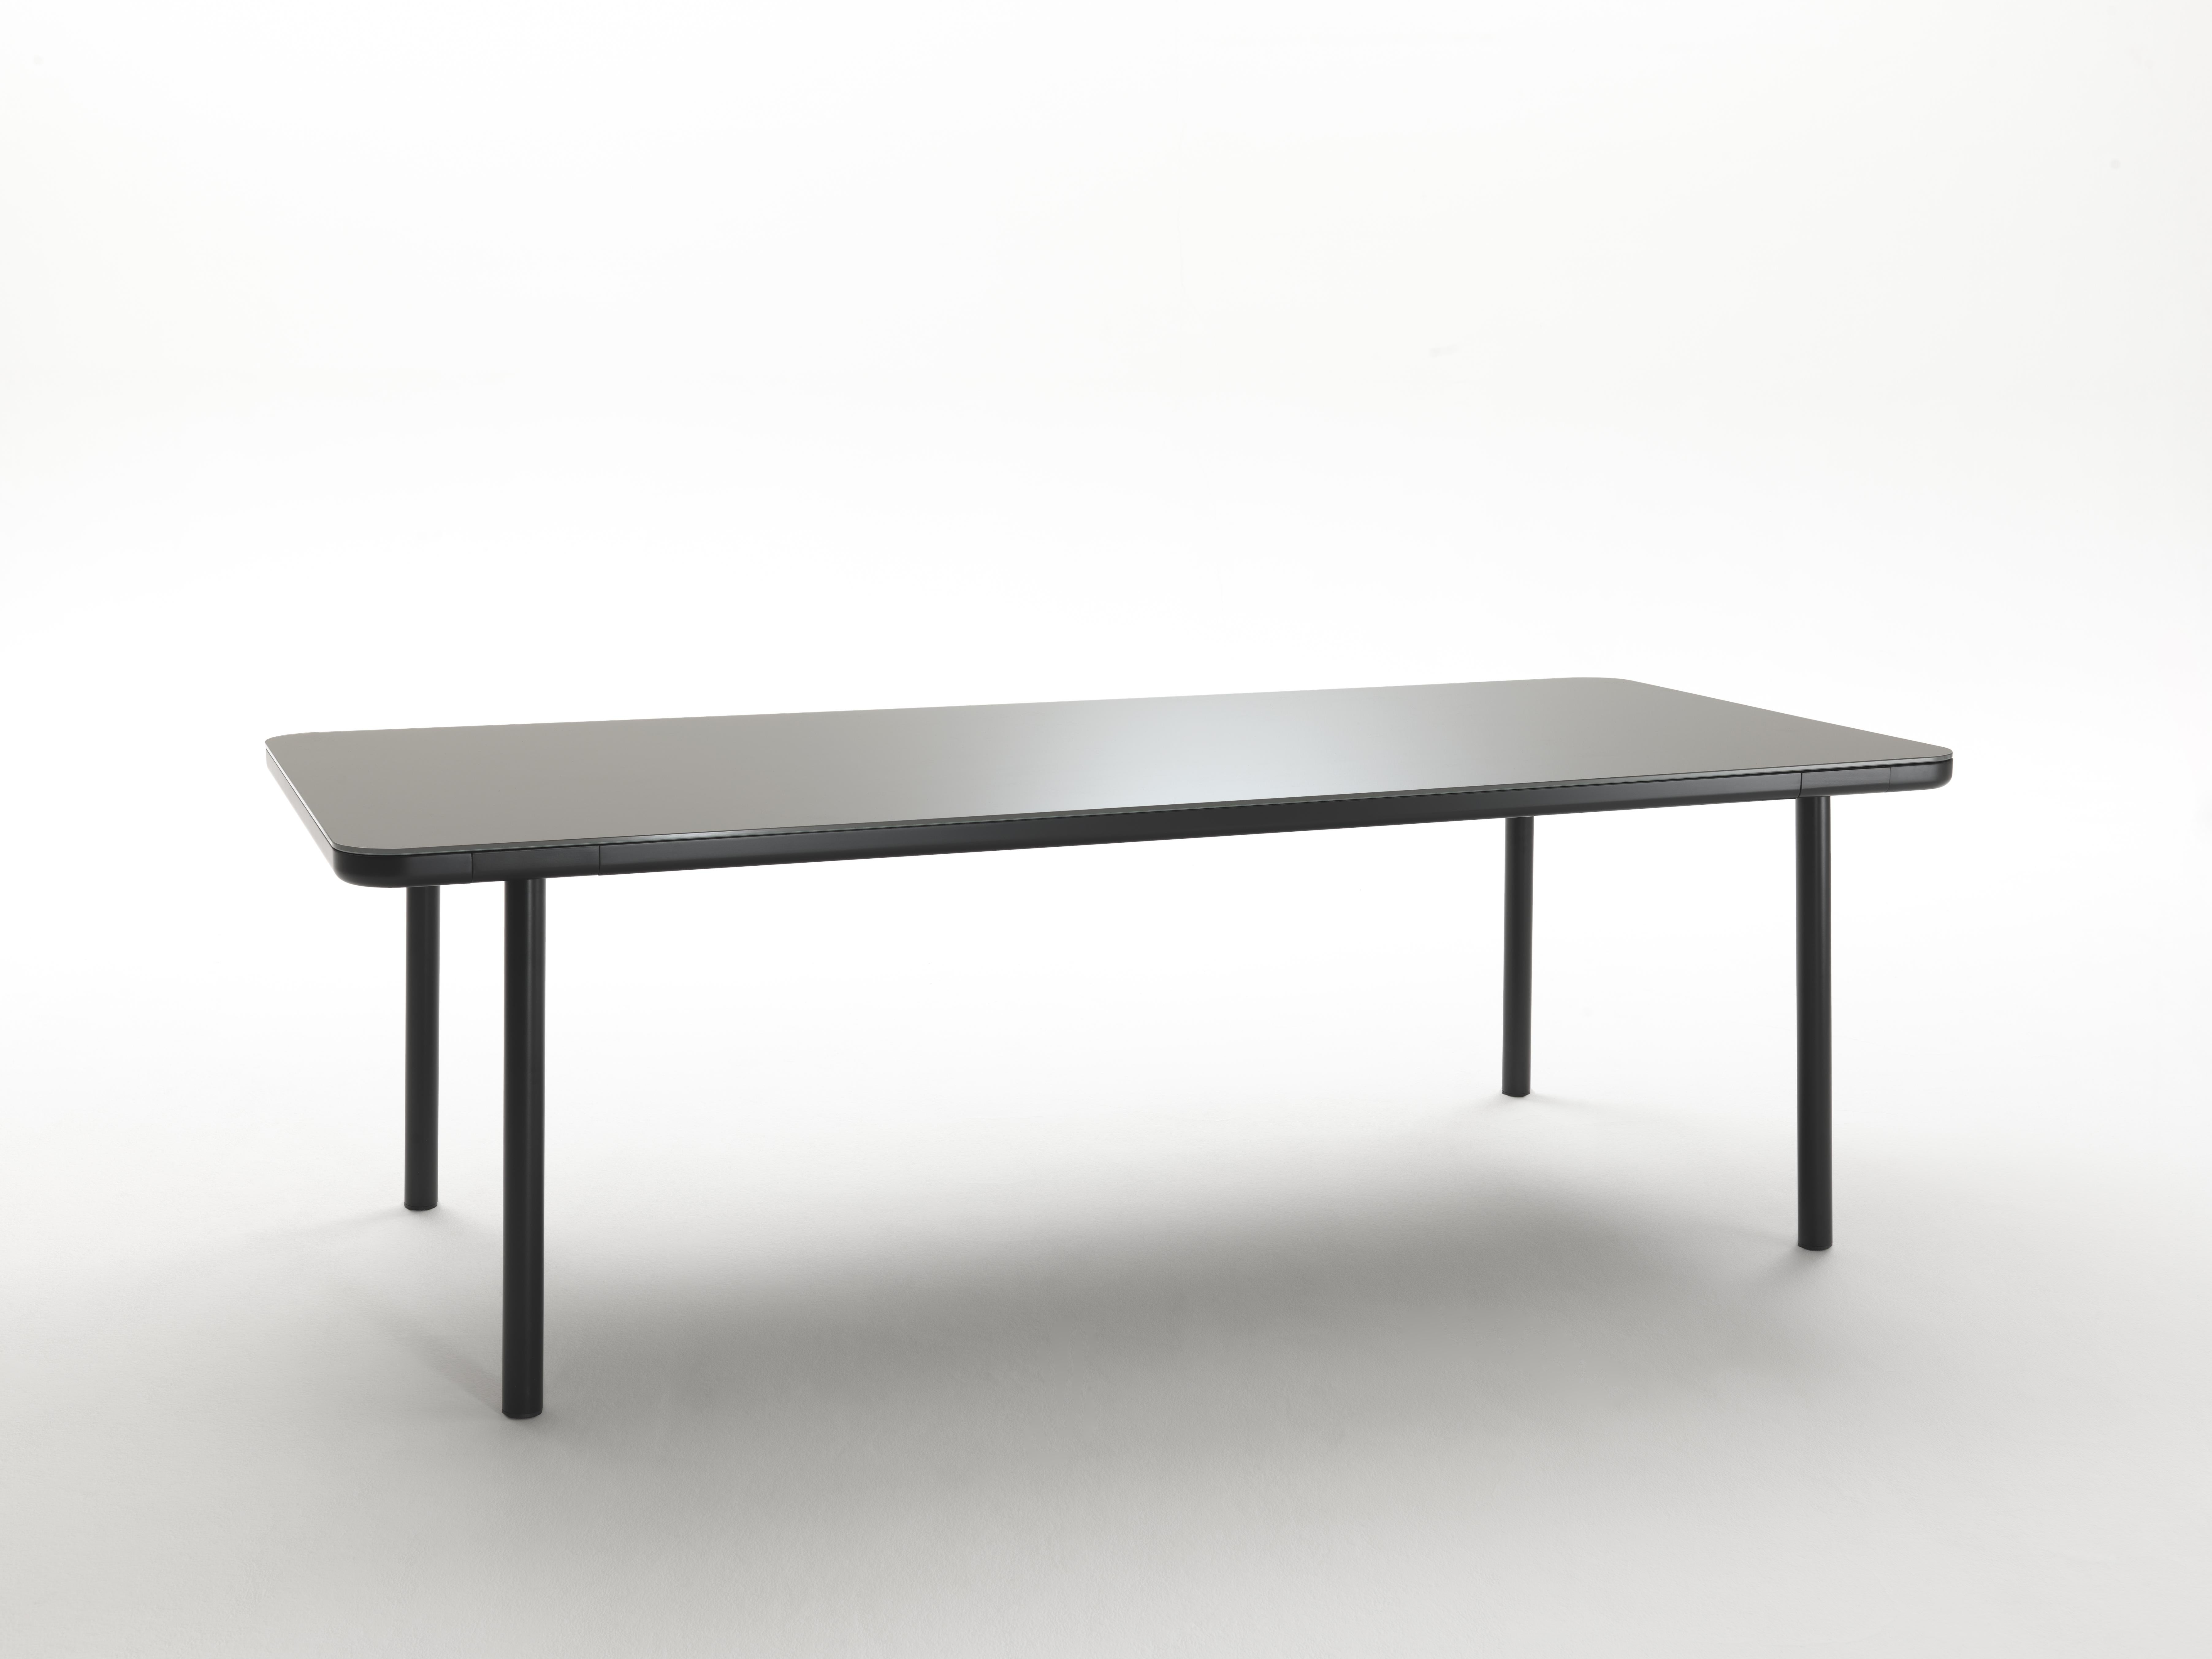 Chromed point neuf table by Rodolfo Dordoni
Materials: Black chromed or black lacquered metal base with gray or matt black lacquered glass top resting on a black lacquered solid wood structure.
Technique: Lacquered metal, Chromed. 
Dimensions: D